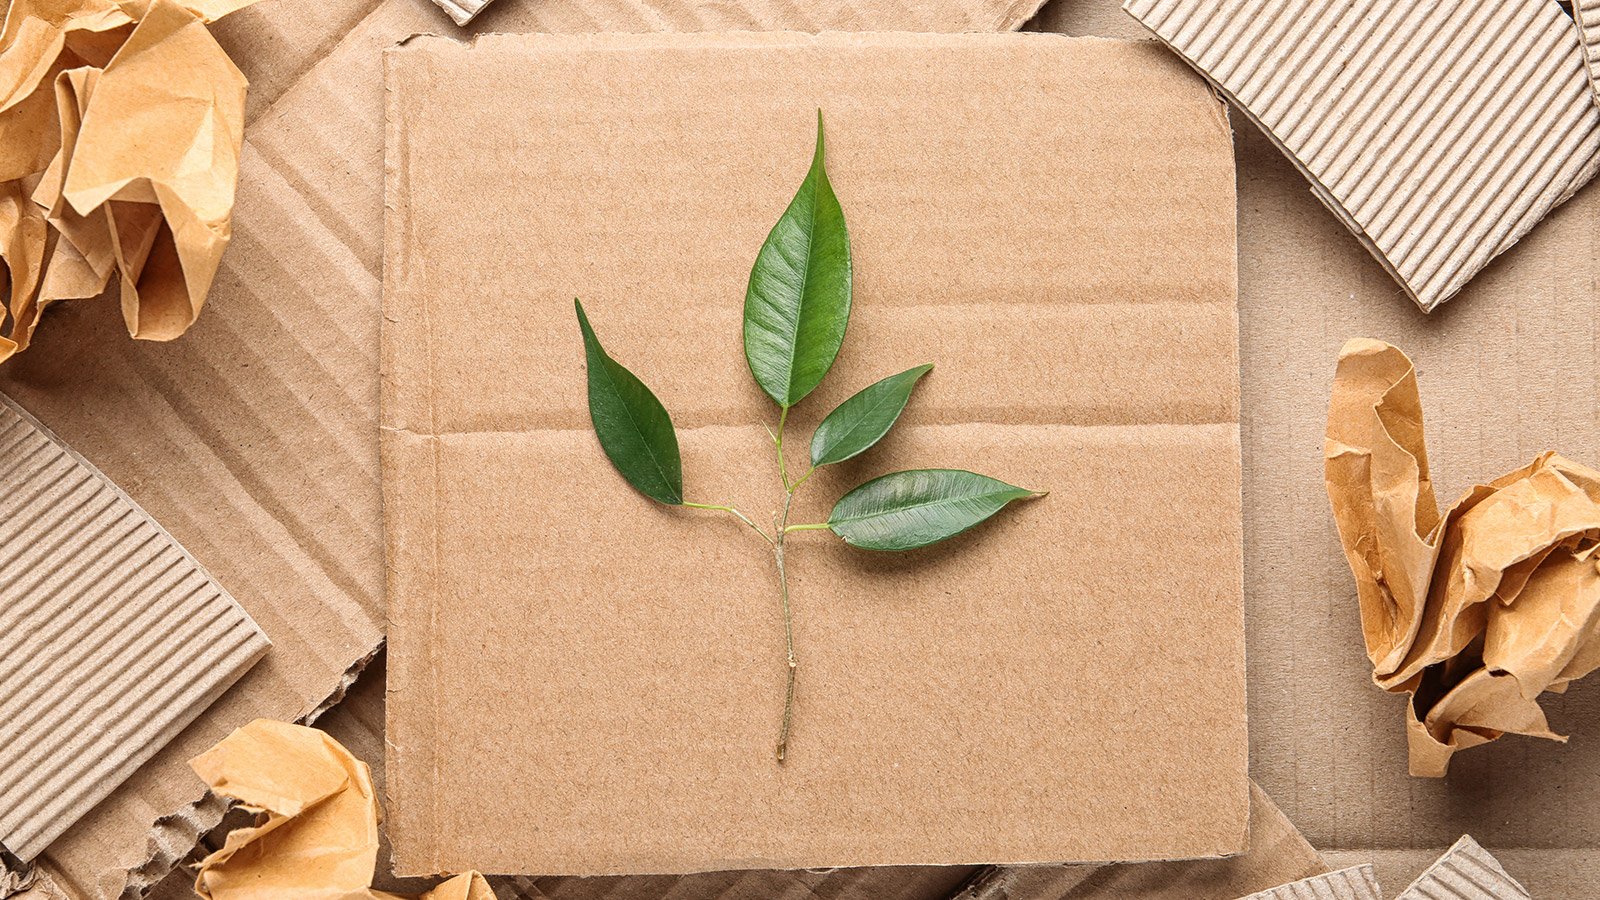 What Materials Are Best for Sustainable Packaging?